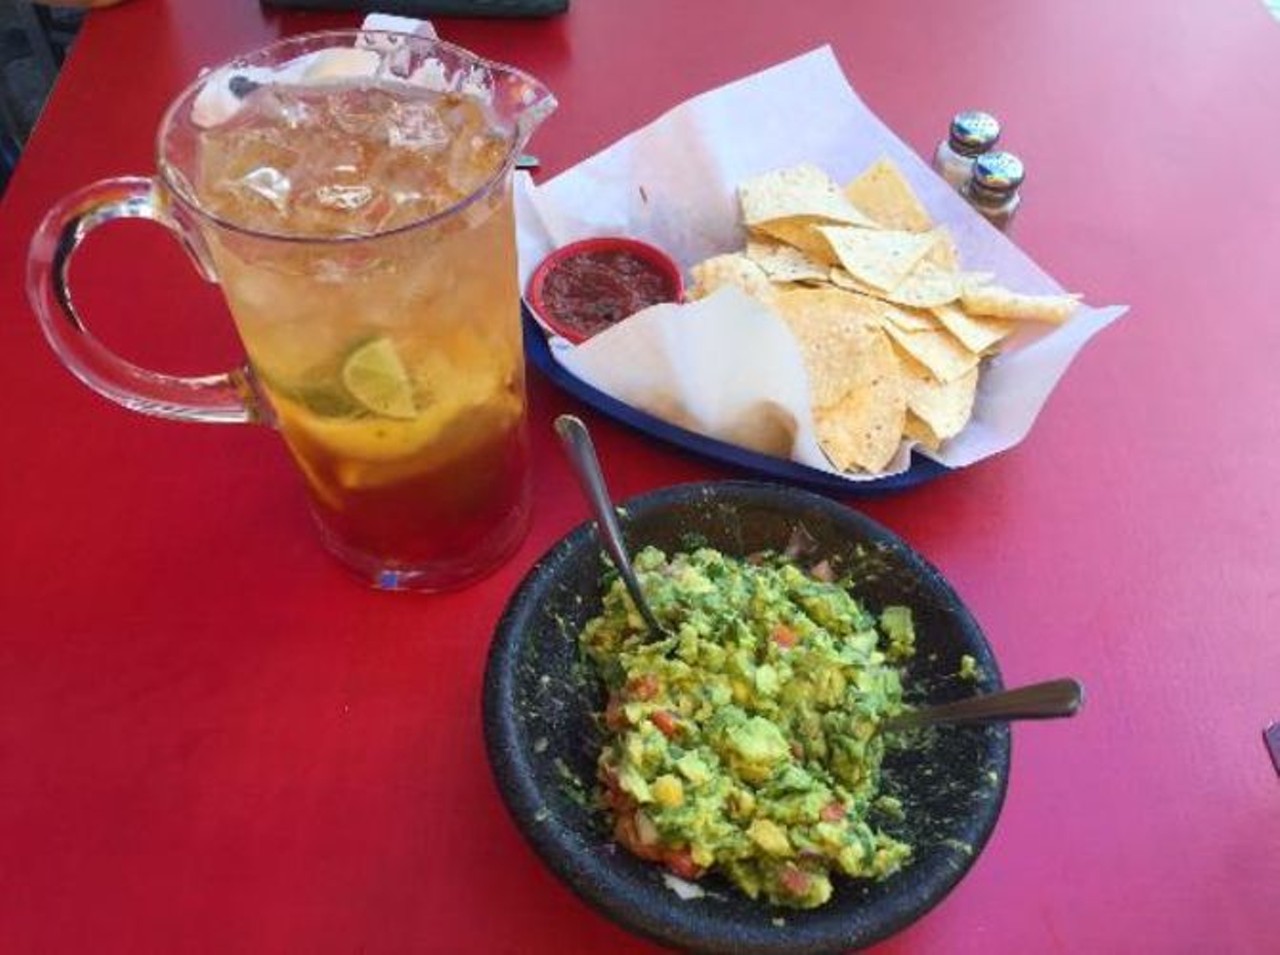 Rita&#146;s on the River 
245 E. Commerce St., (210) 227-7482 
Although Rita&#146;s on the River is known for its tasty margaritas, make sure to give their sangria a try. Enjoy the drink while looking out over the Riverwalk. 
Photo via Instagram, mollieeelise